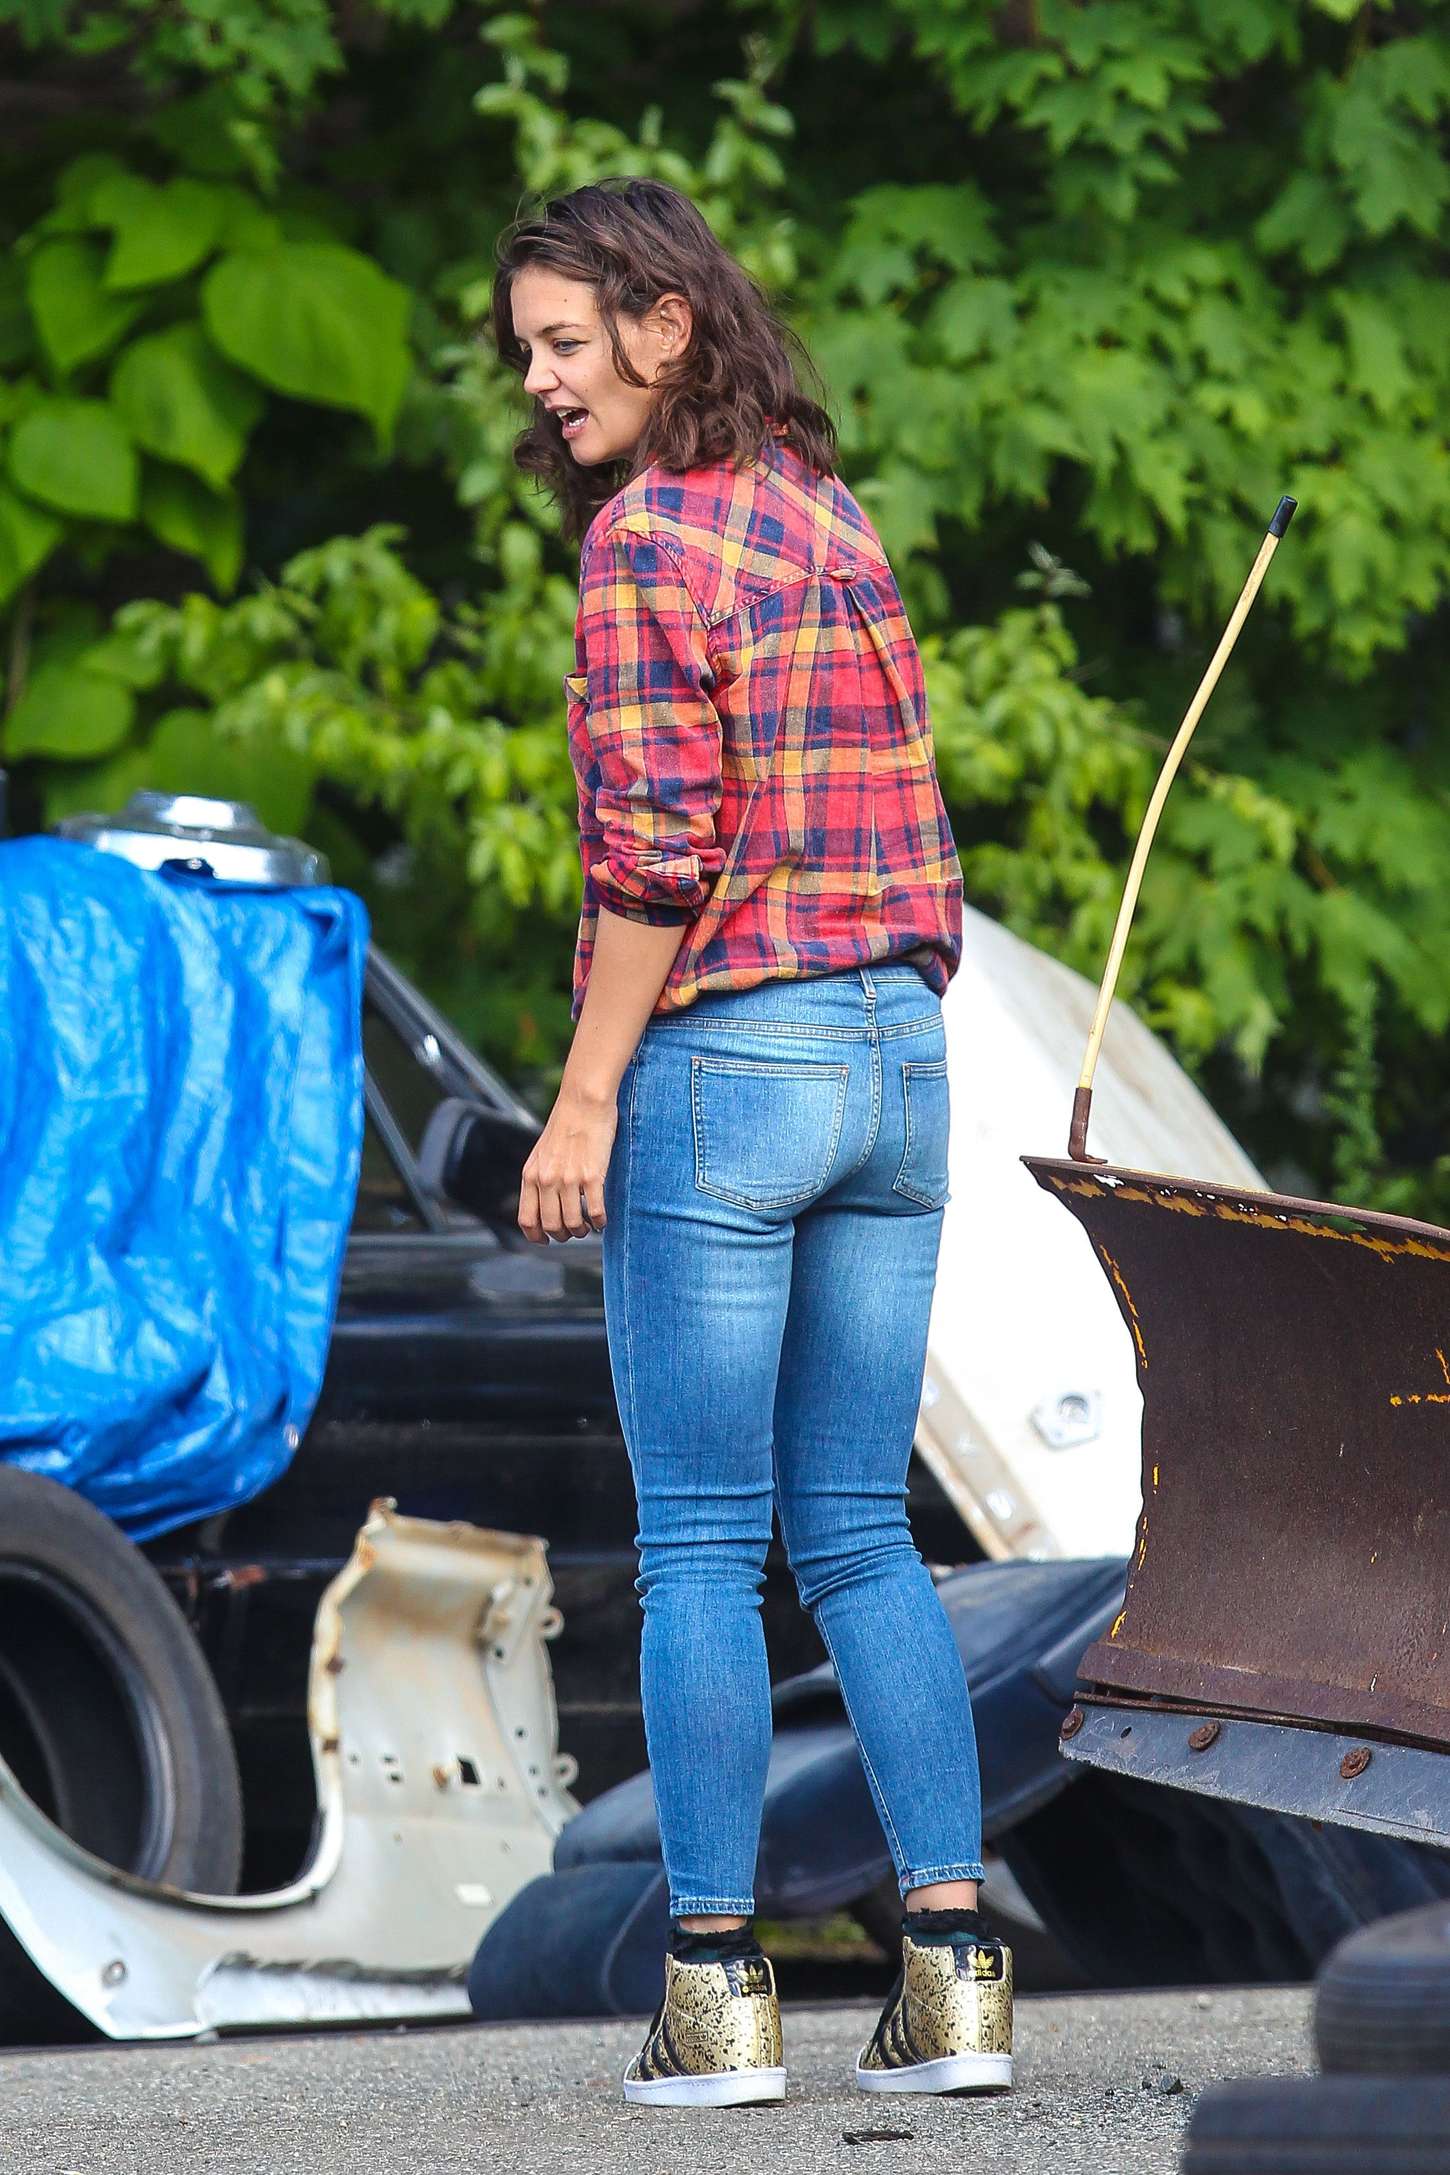 Katie Holmes 2015 : Katie Holmes Booty in Jeans on All We Had -07. 